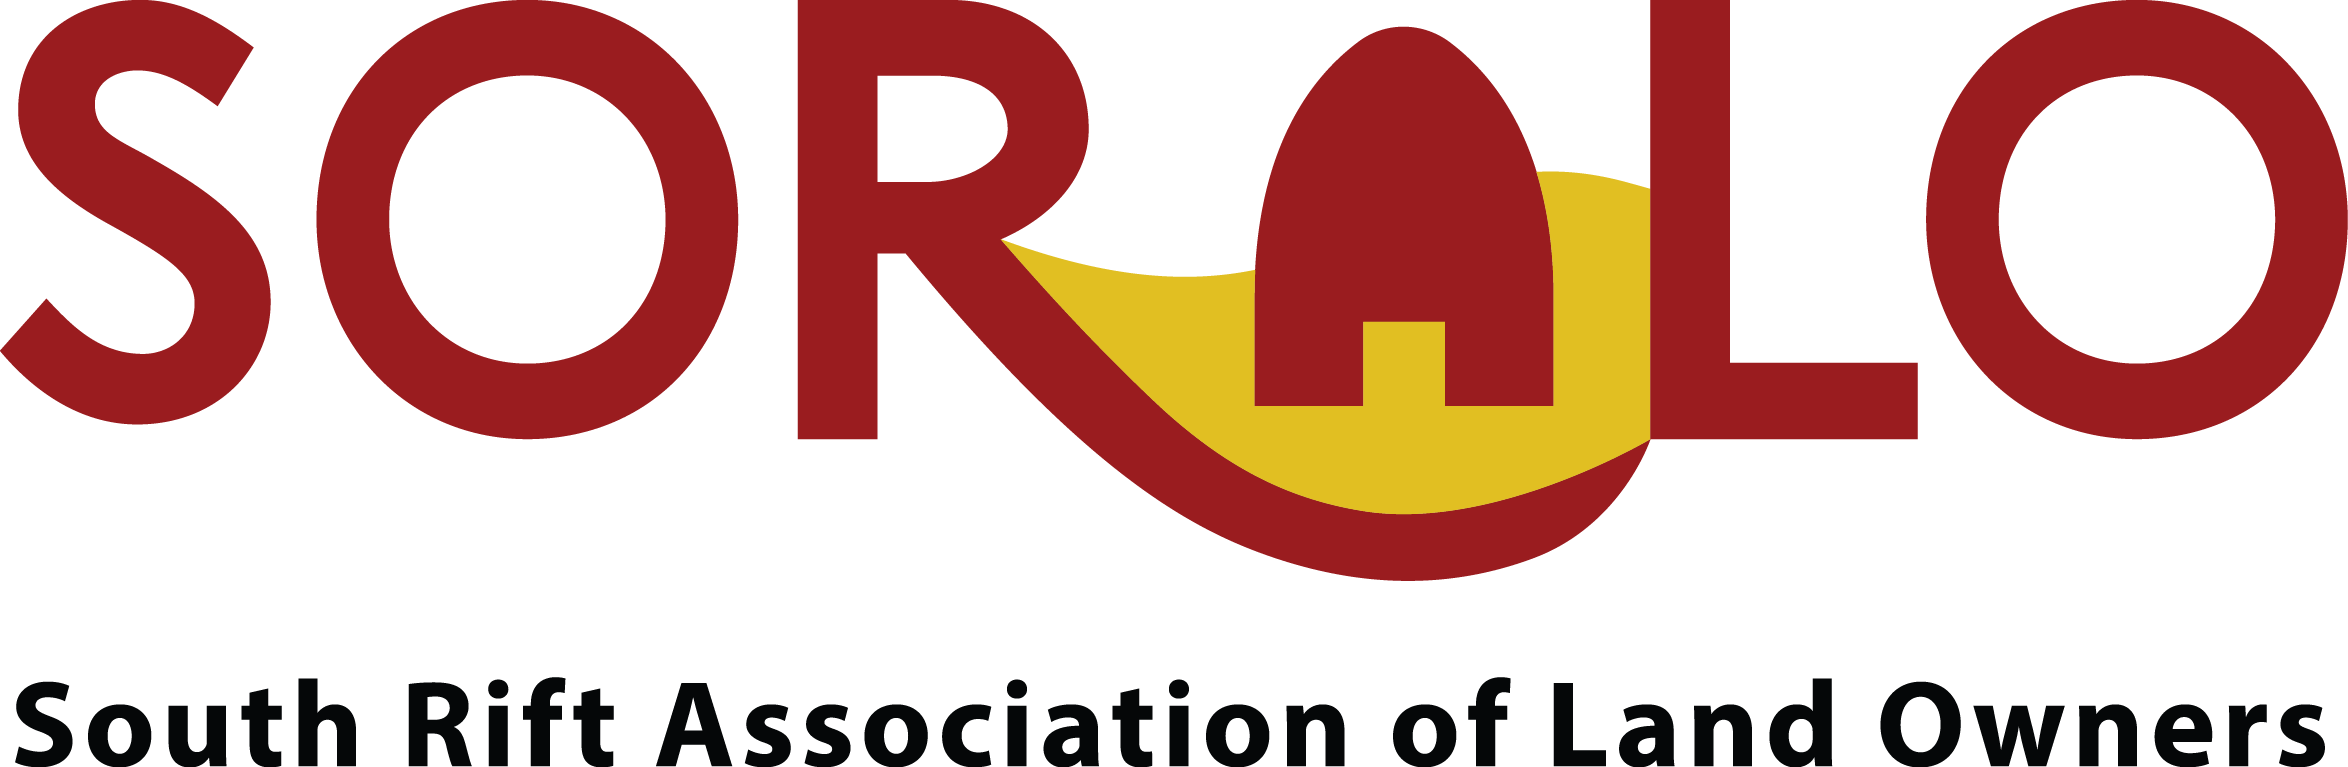 Logo-South Rift Association of Land Owners